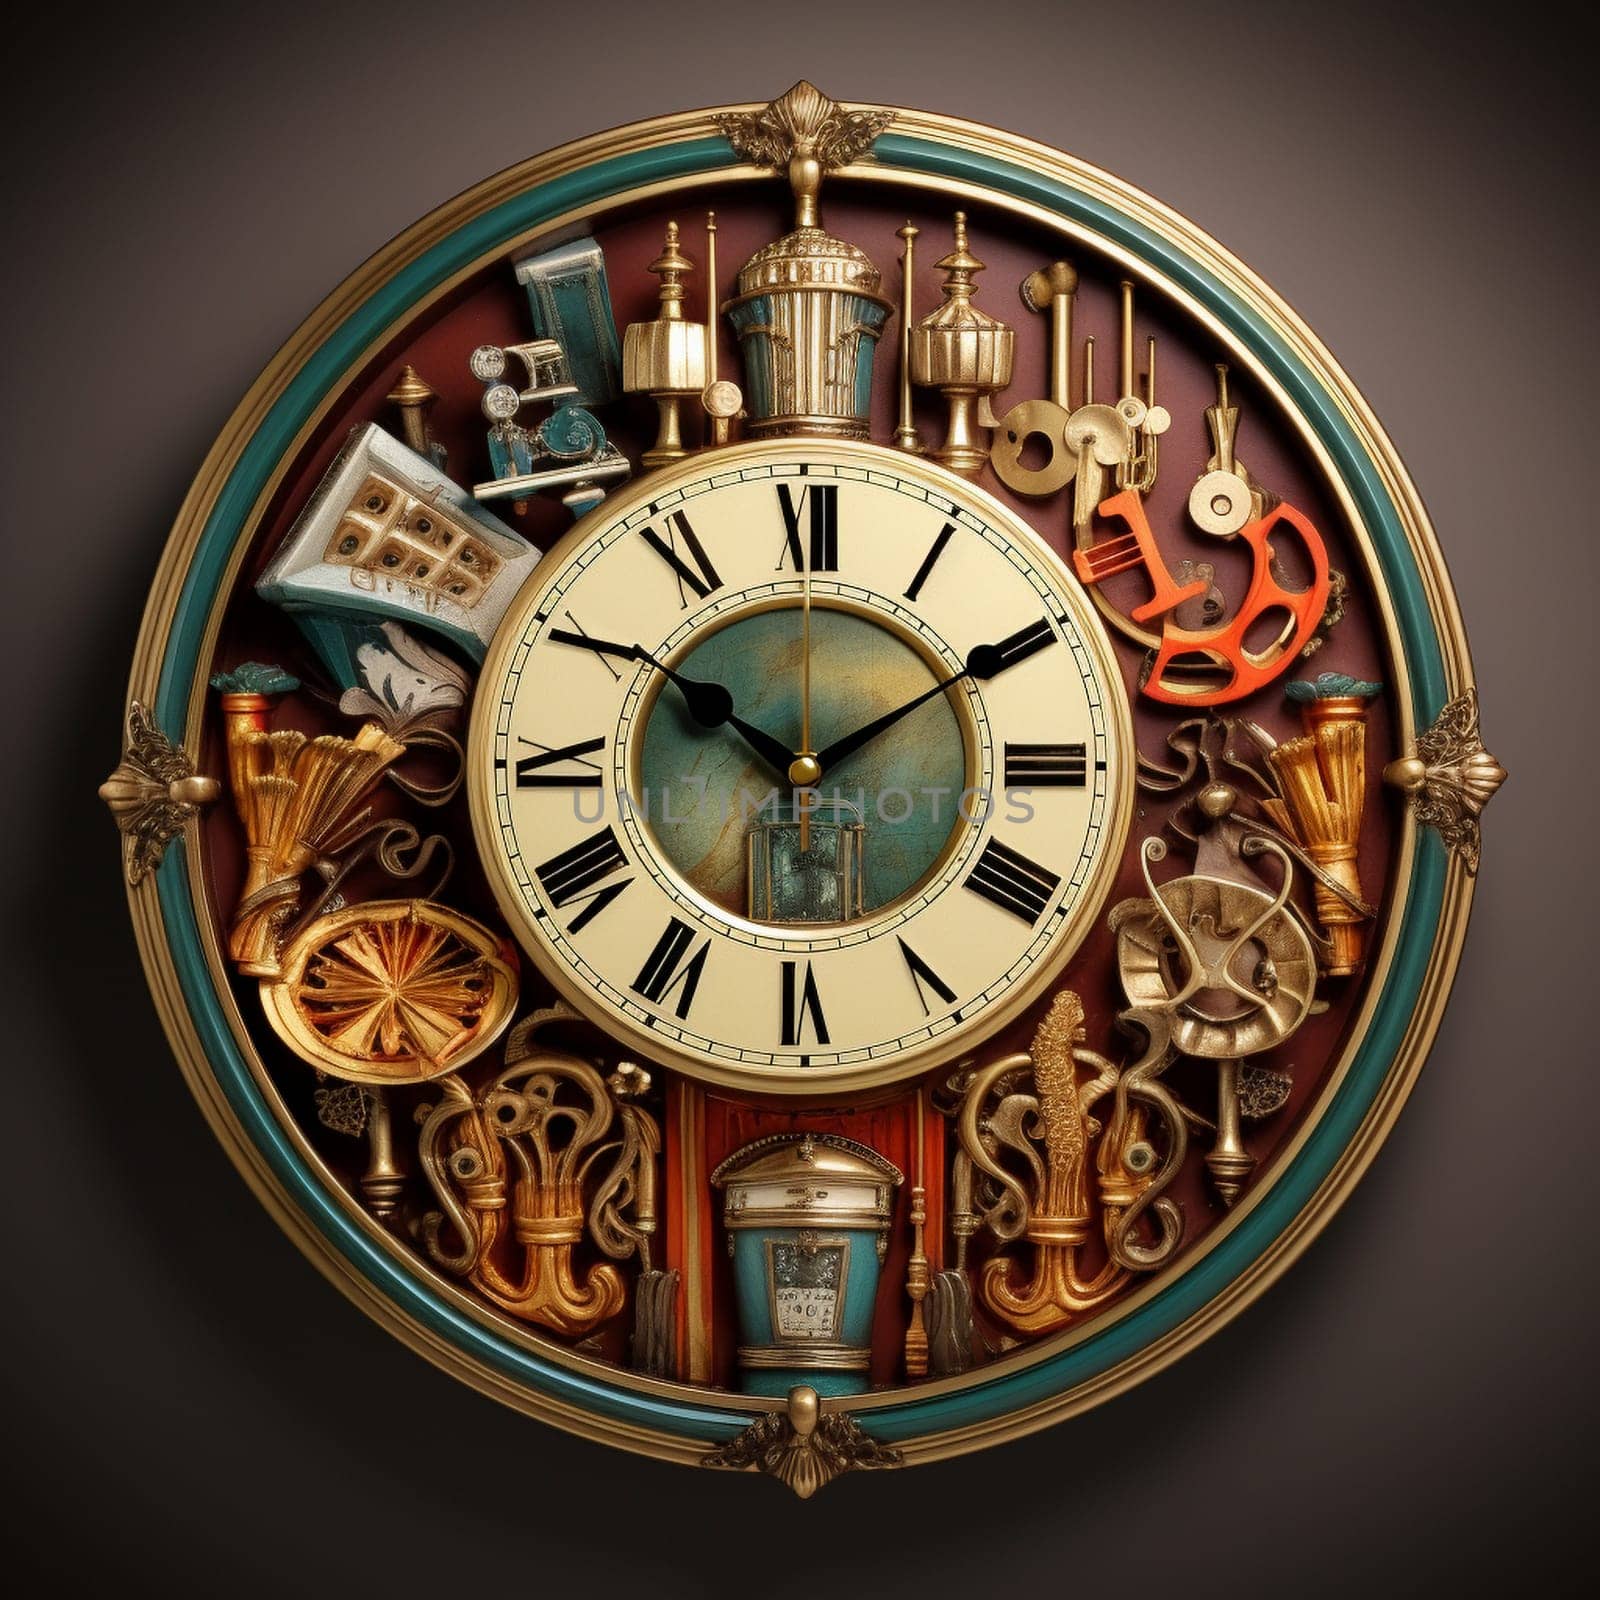 Step into the world of whimsy and nostalgia with this enchanting image titled 'Antique Symphony: Melodies of Time in Vintage Clocks.' In this imaginary scene, a grand stage is adorned with finely crafted vintage clocks, each representing a different musical instrument. The vibrant, crisp colors resemble an old oil painting style, bringing the scene to life with a touch of timeless beauty. The hands of the clocks transform into musical notes, creating a harmonious melody that fills the air. The clocks wear tiny musical conductor uniforms, adding a whimsical touch to the orchestra of time. The pendulums of the clocks float like conductor's batons, emitting cascades of melodic harmonies. This captivating blend of vintage charm and musical whimsy evokes a sense of nostalgia while celebrating the wonders of time in a unique and magical way.